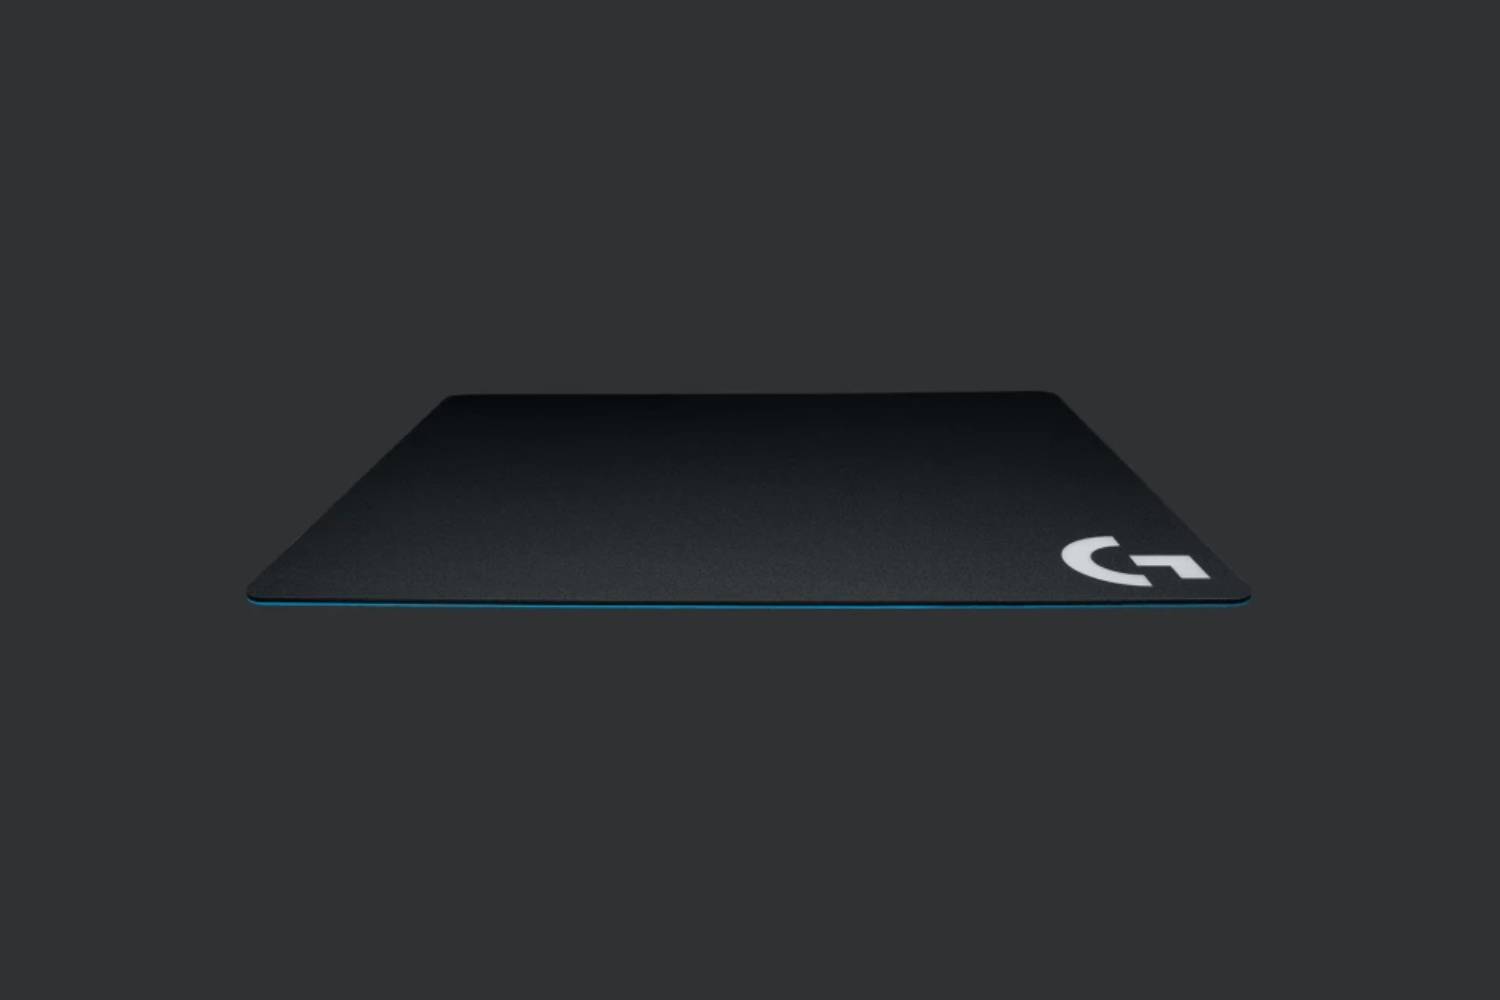 Logitech G440 Cloth Gaming Mouse Pad